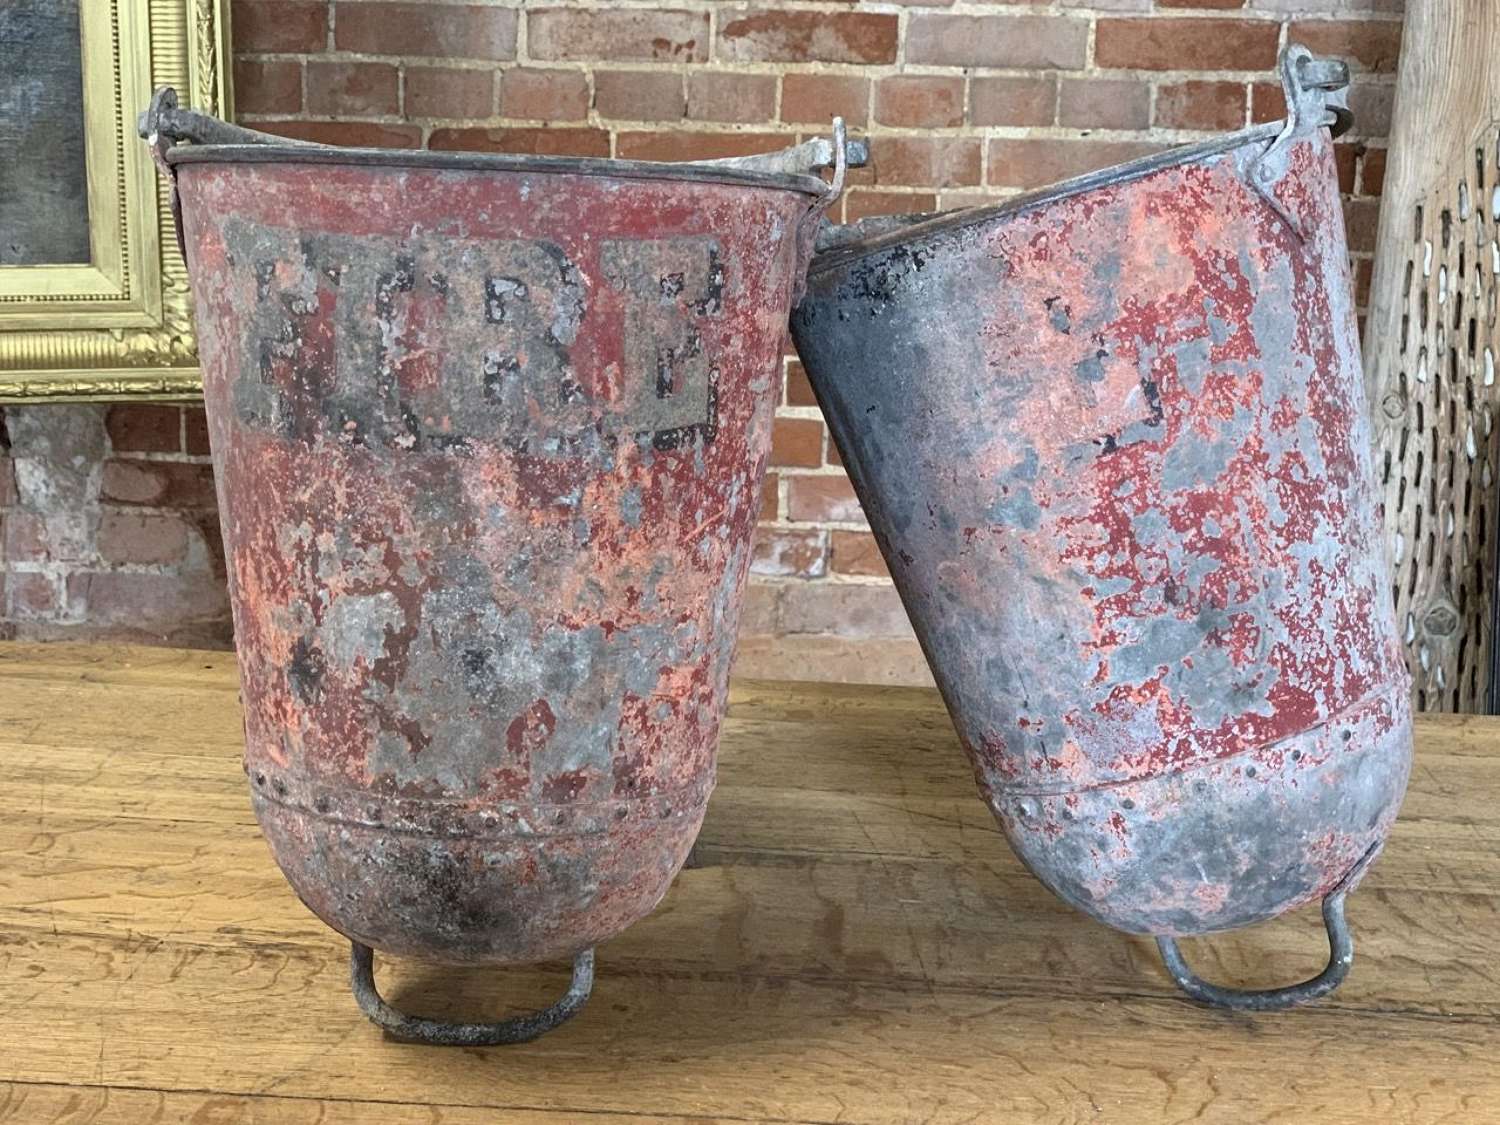 PAIR OF EARLY 20TH CENTURY FIRE BUCKETS